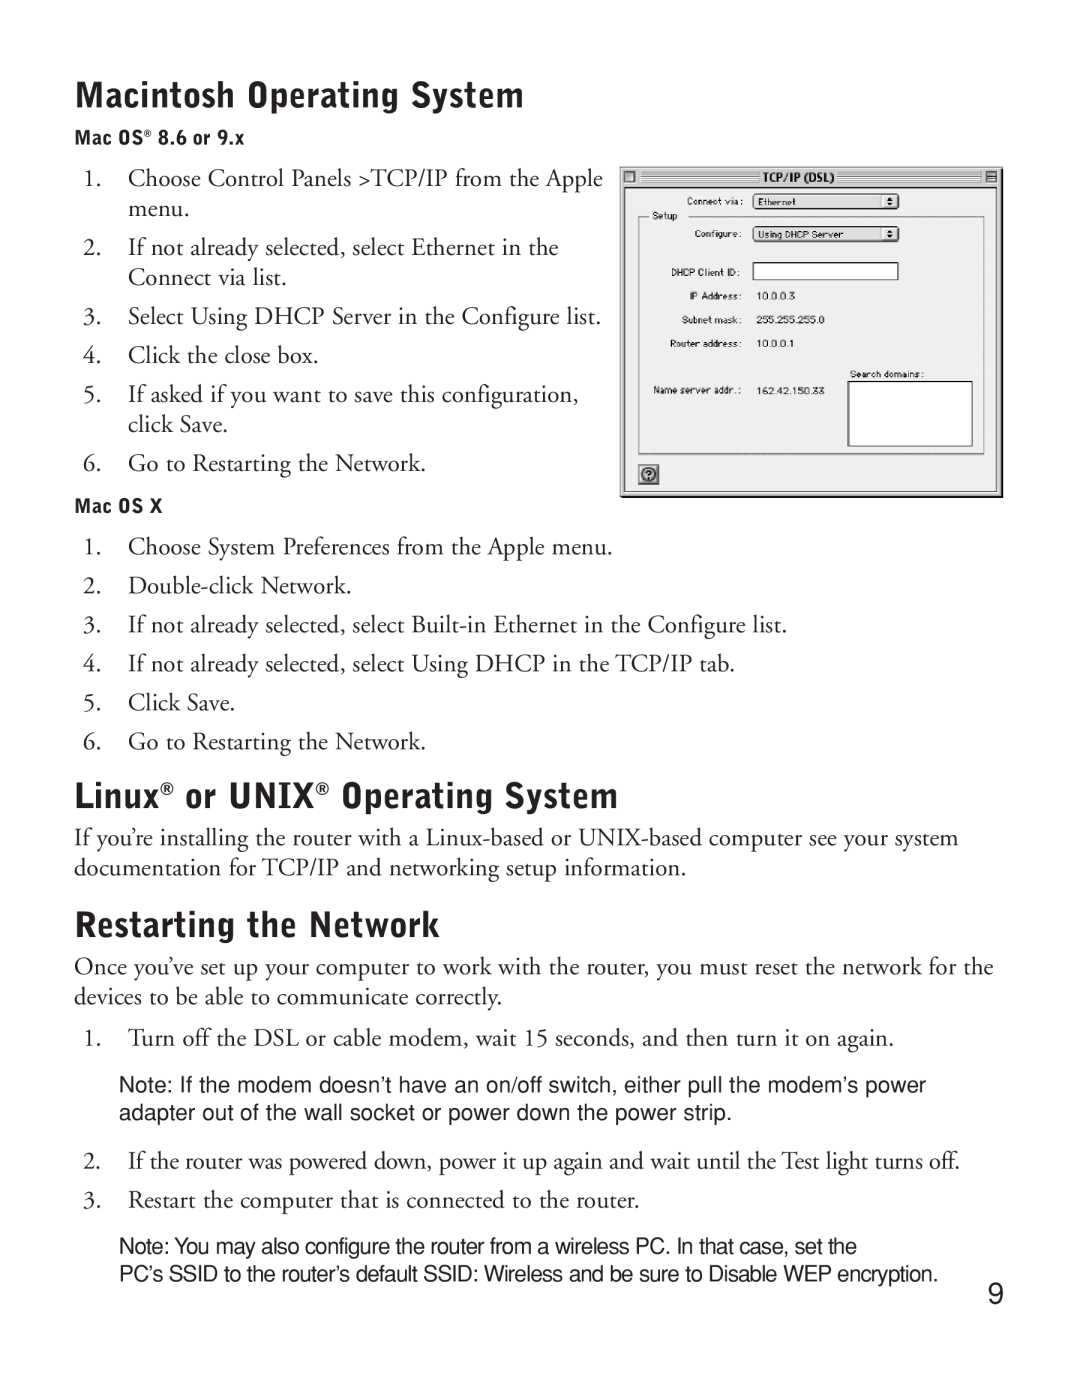 NETGEAR HR314 manual Macintosh Operating System, Linux or UNIX Operating System, Restarting the Network 